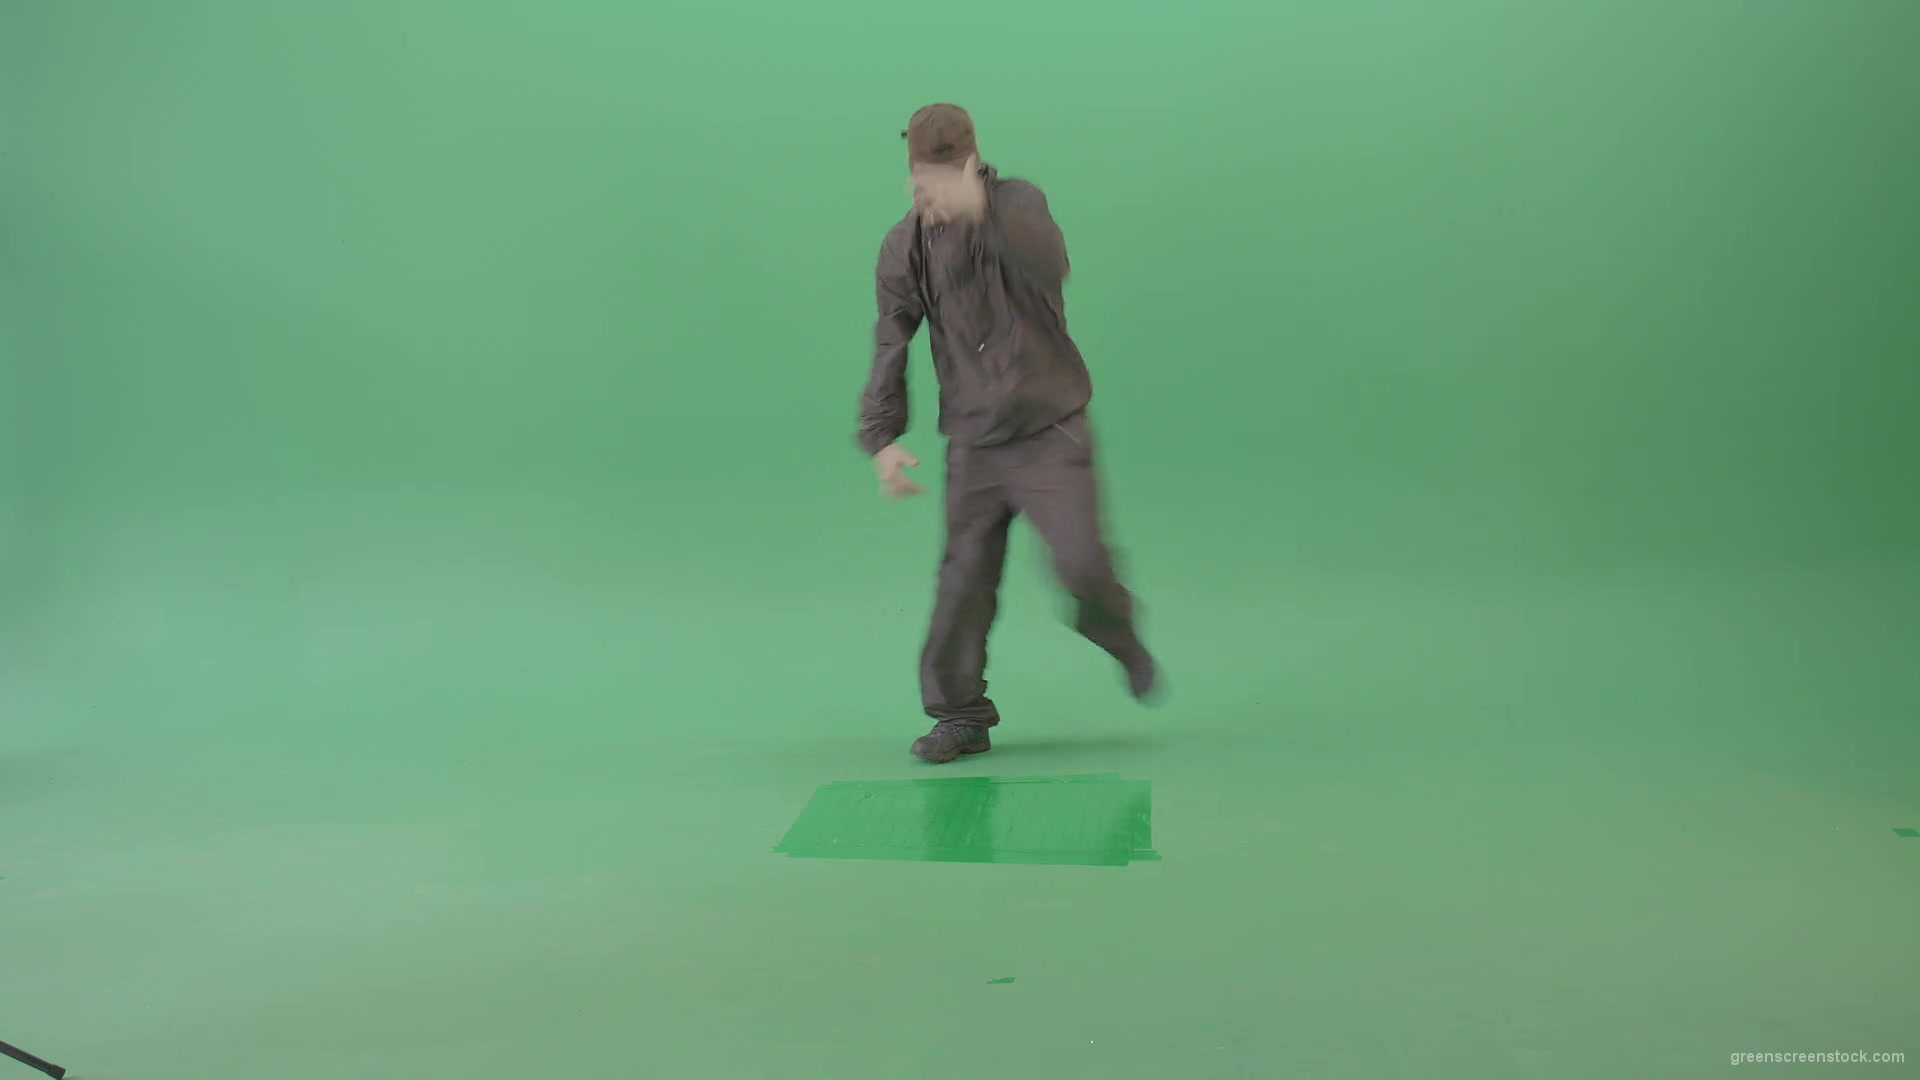 B-Boy-breakdance-man-making-power-moves-isolated-on-green-screen-4K-Video-Footage-1920_002 Green Screen Stock